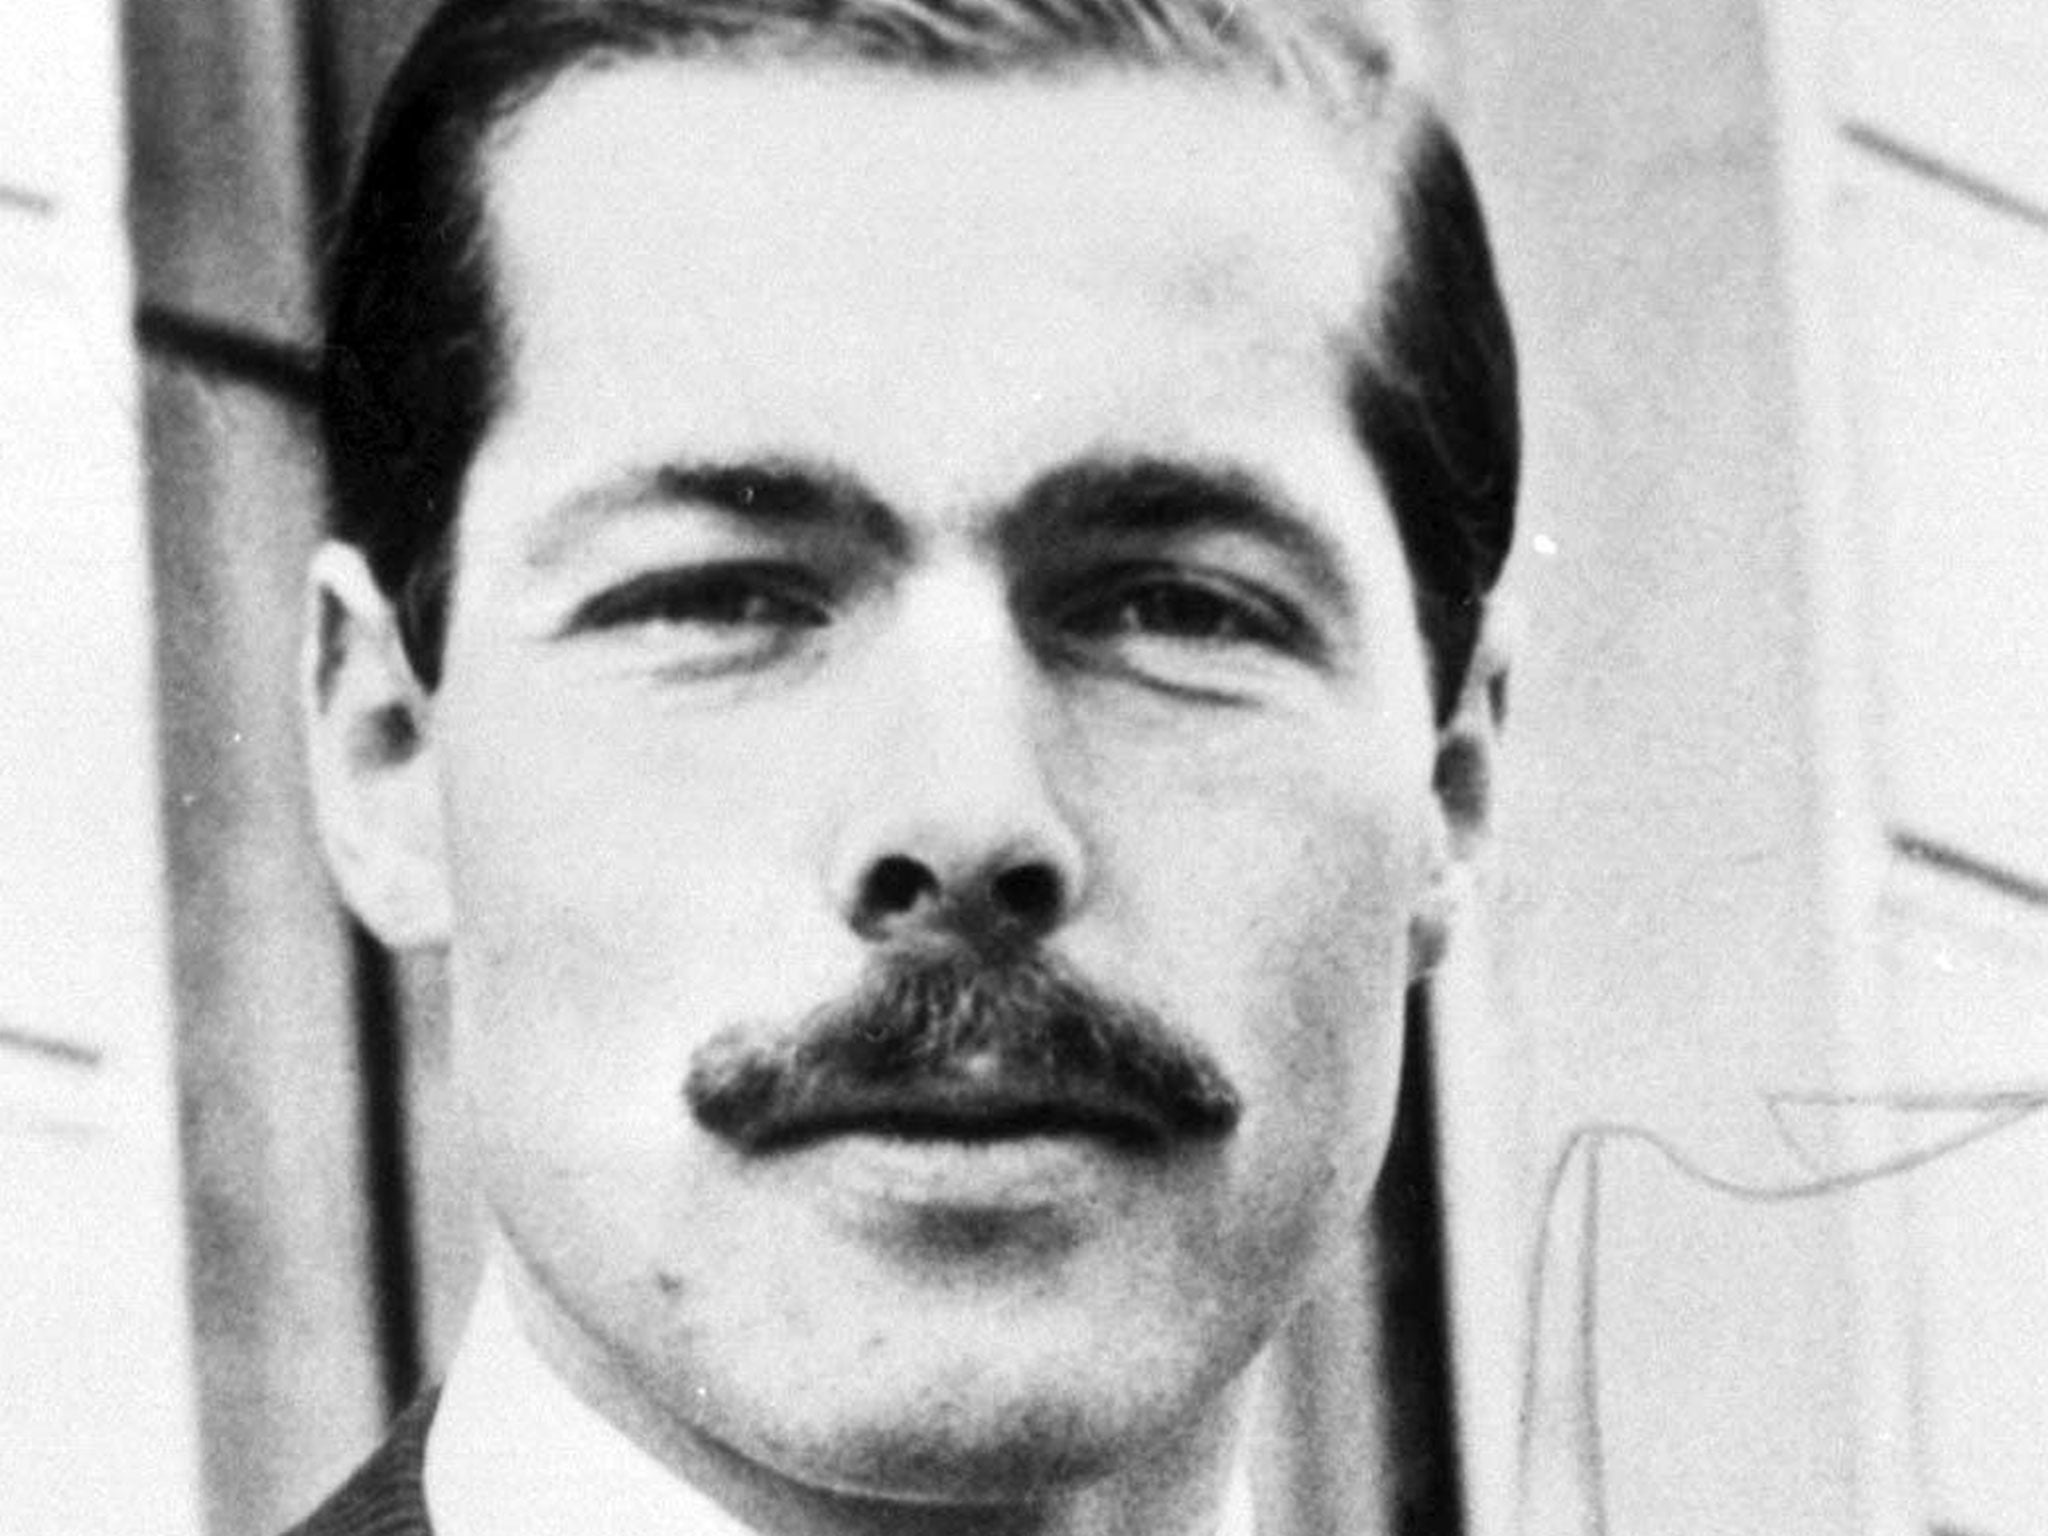 Lord Lucan disappeared in 1974 after the murder of his children's nanny PA